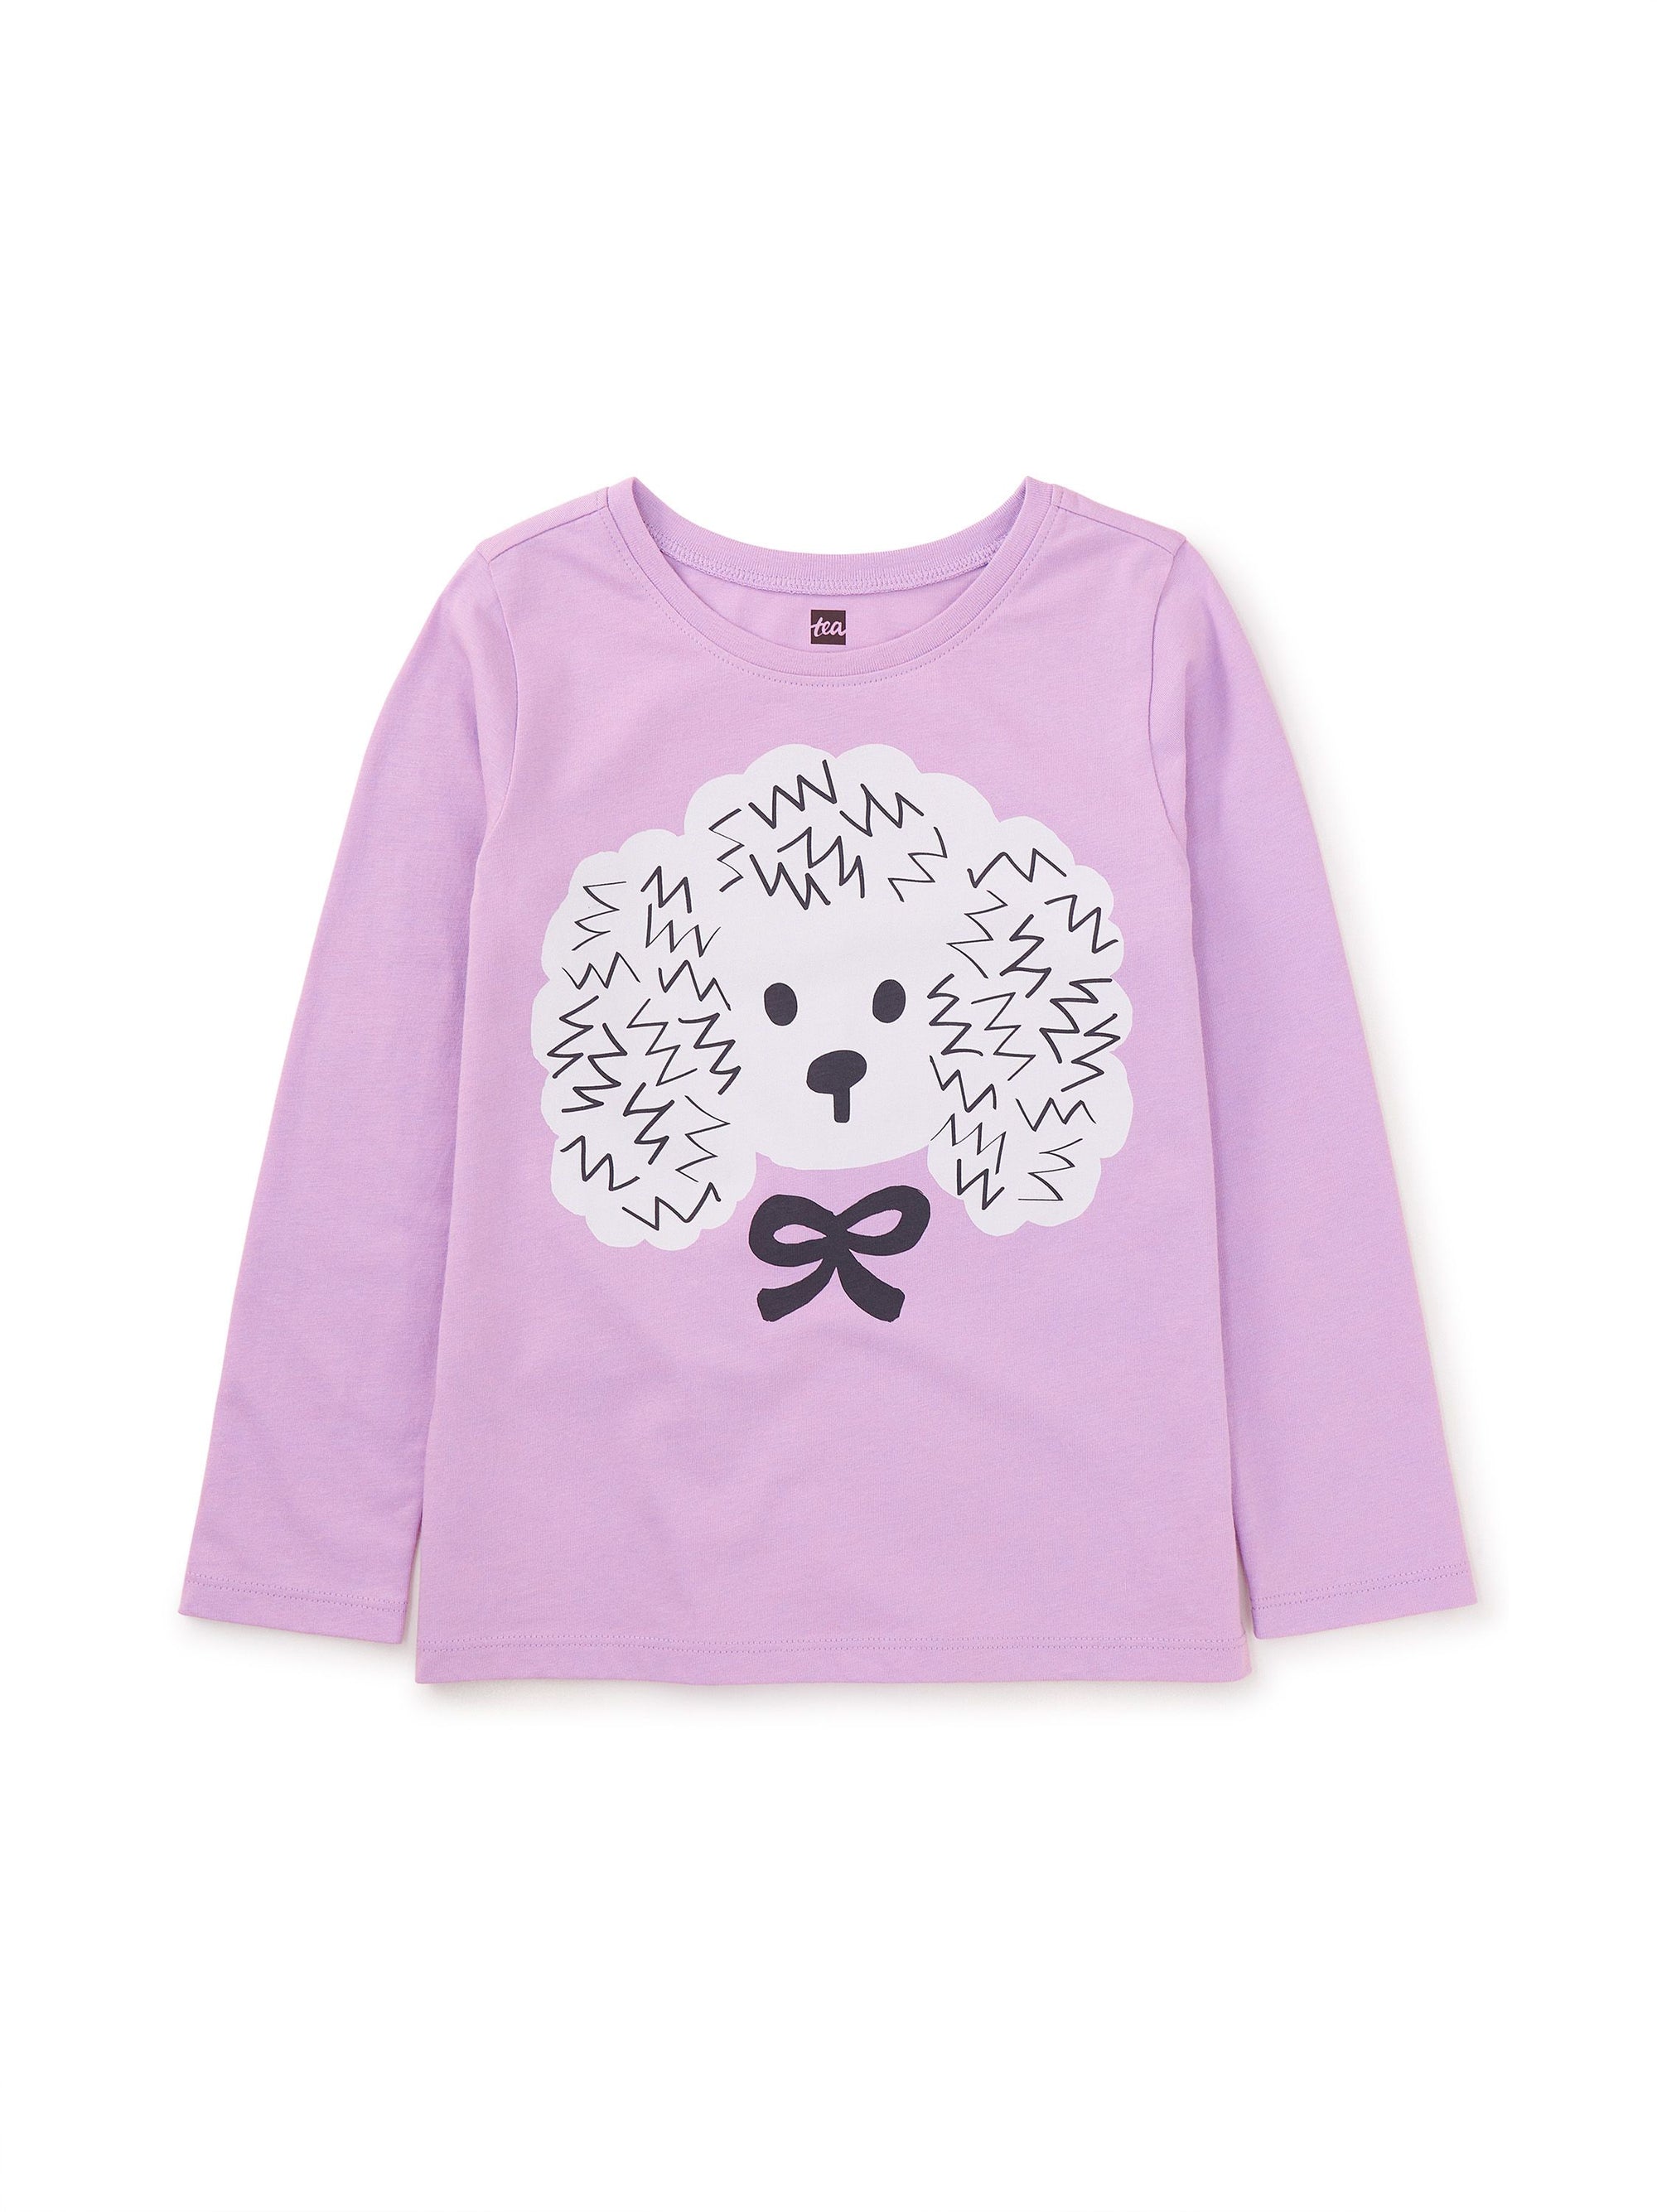 Long Sleeve Graphic Tee - Poodle & Bow Lilac